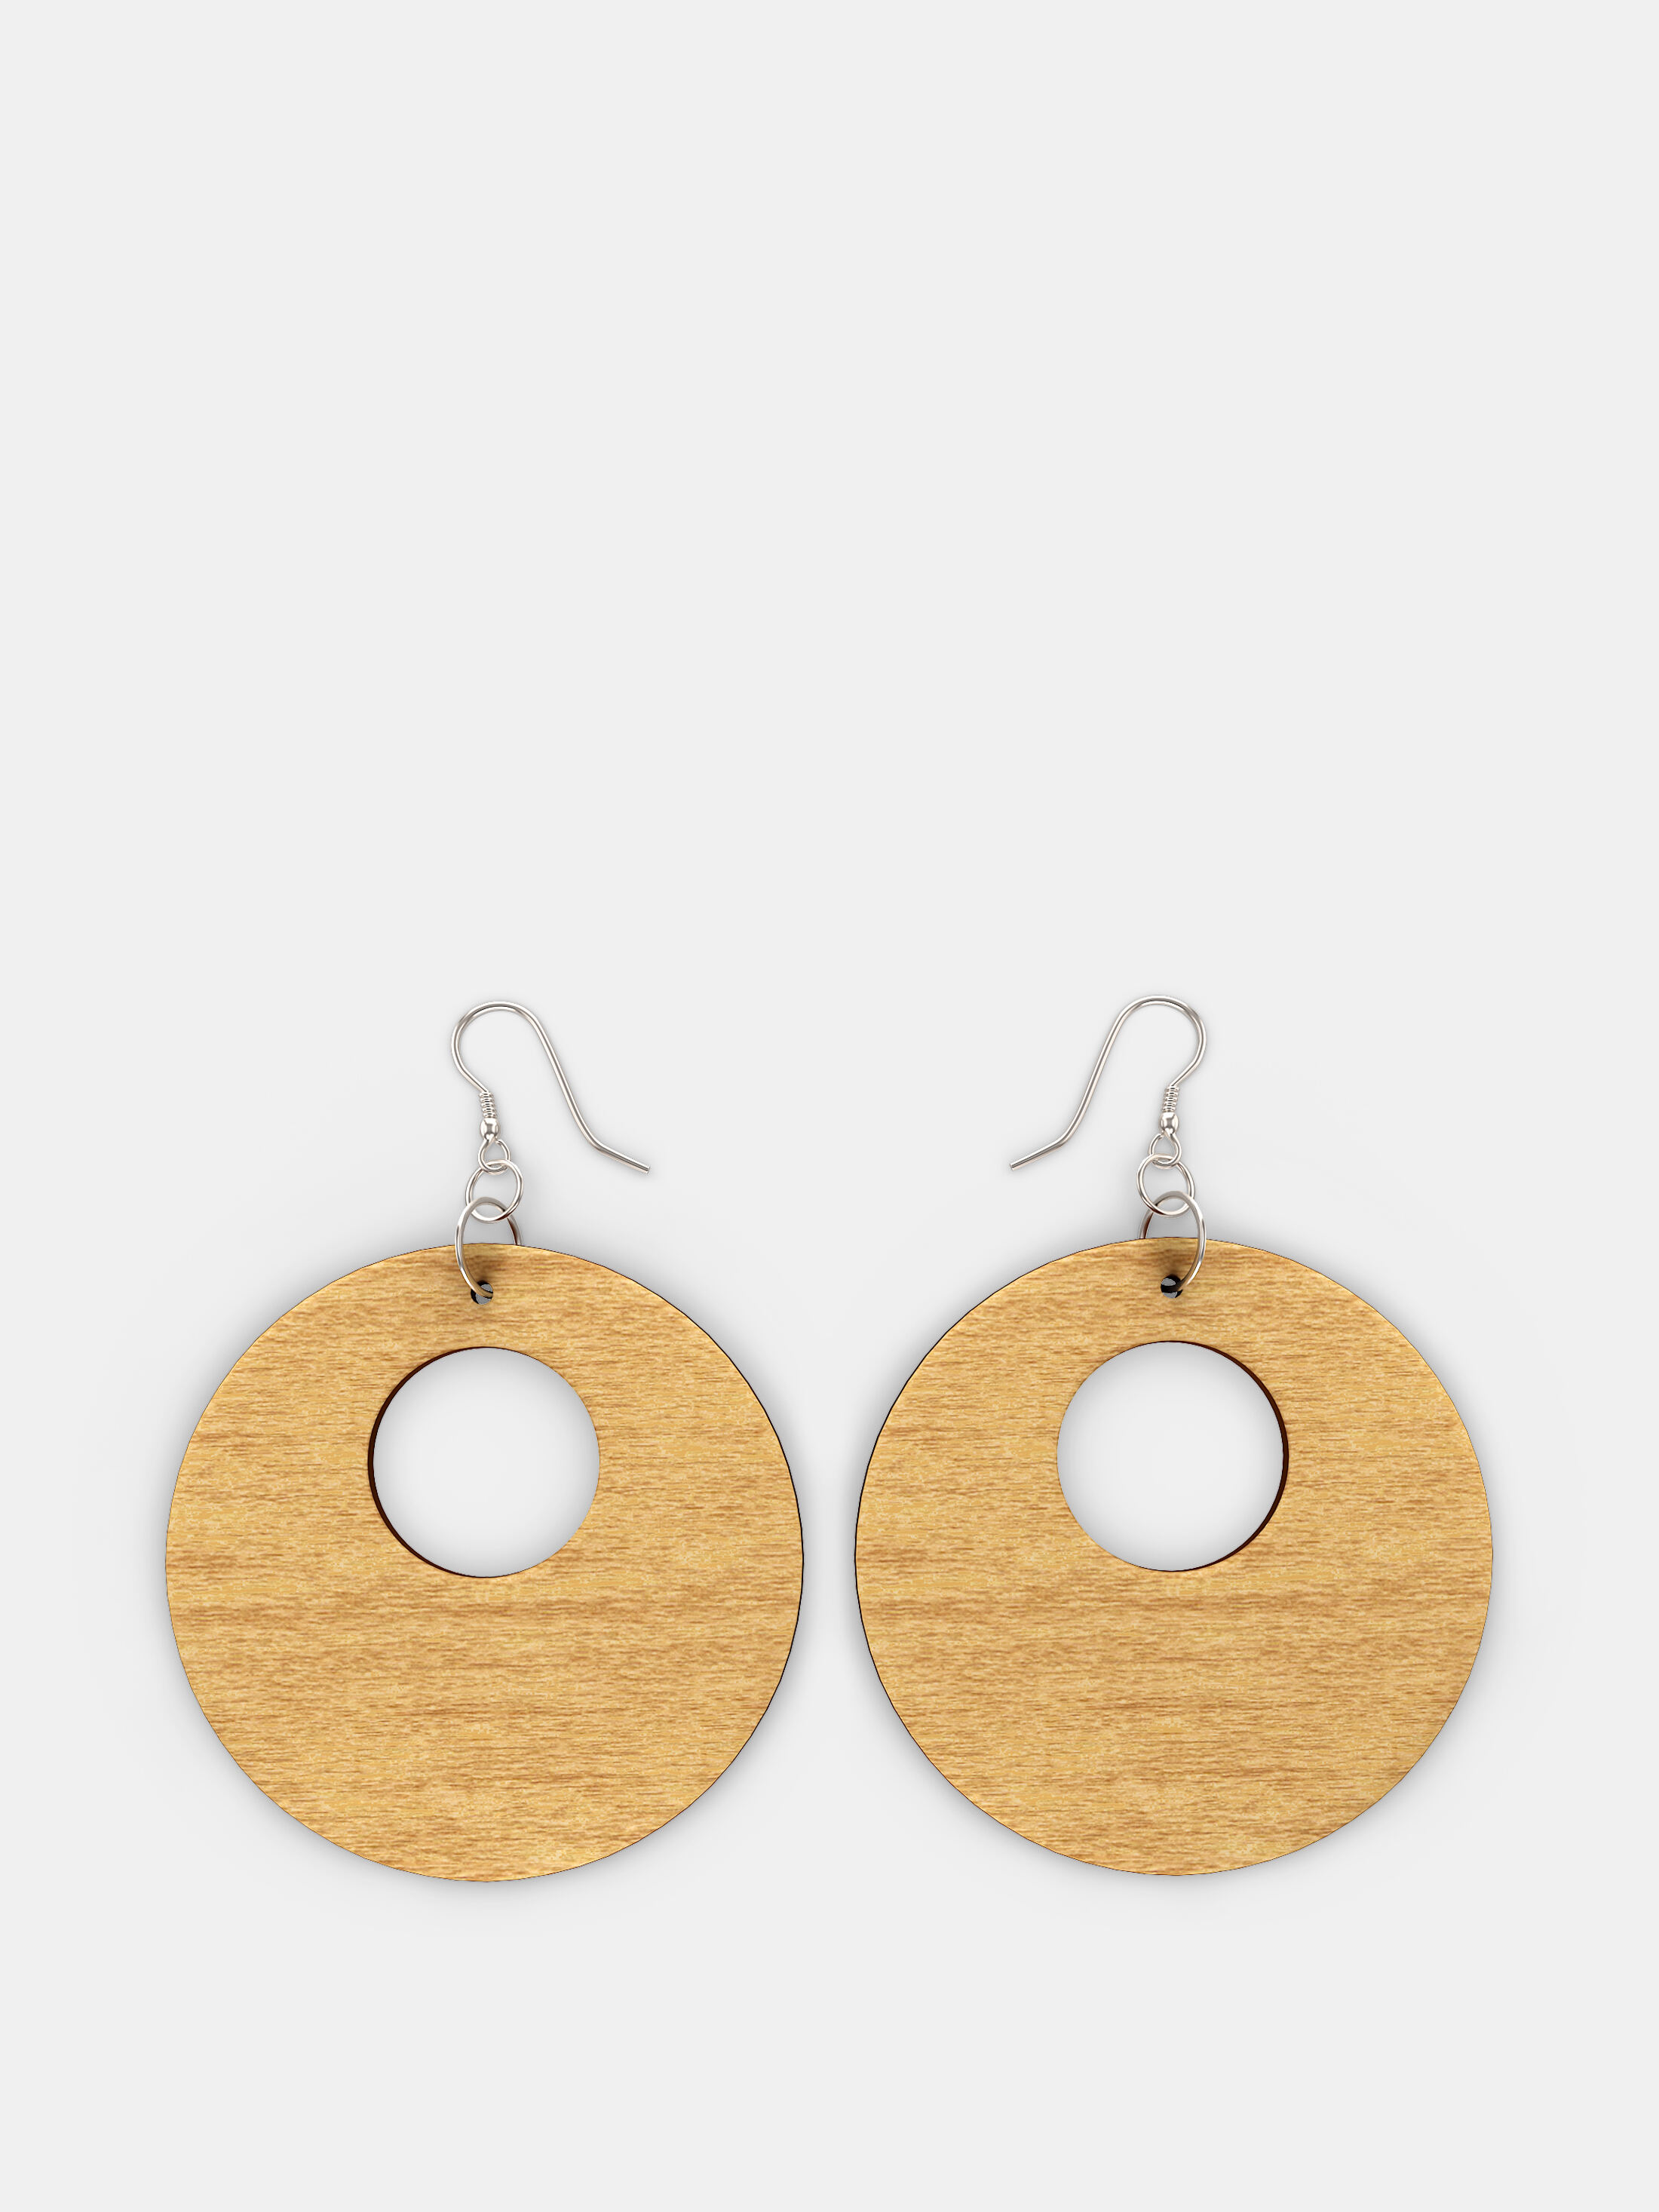 Custom Made Mismatched Laser Engraved Wood Dangle Earrings Asymmetrical State Earrings Choose Your State